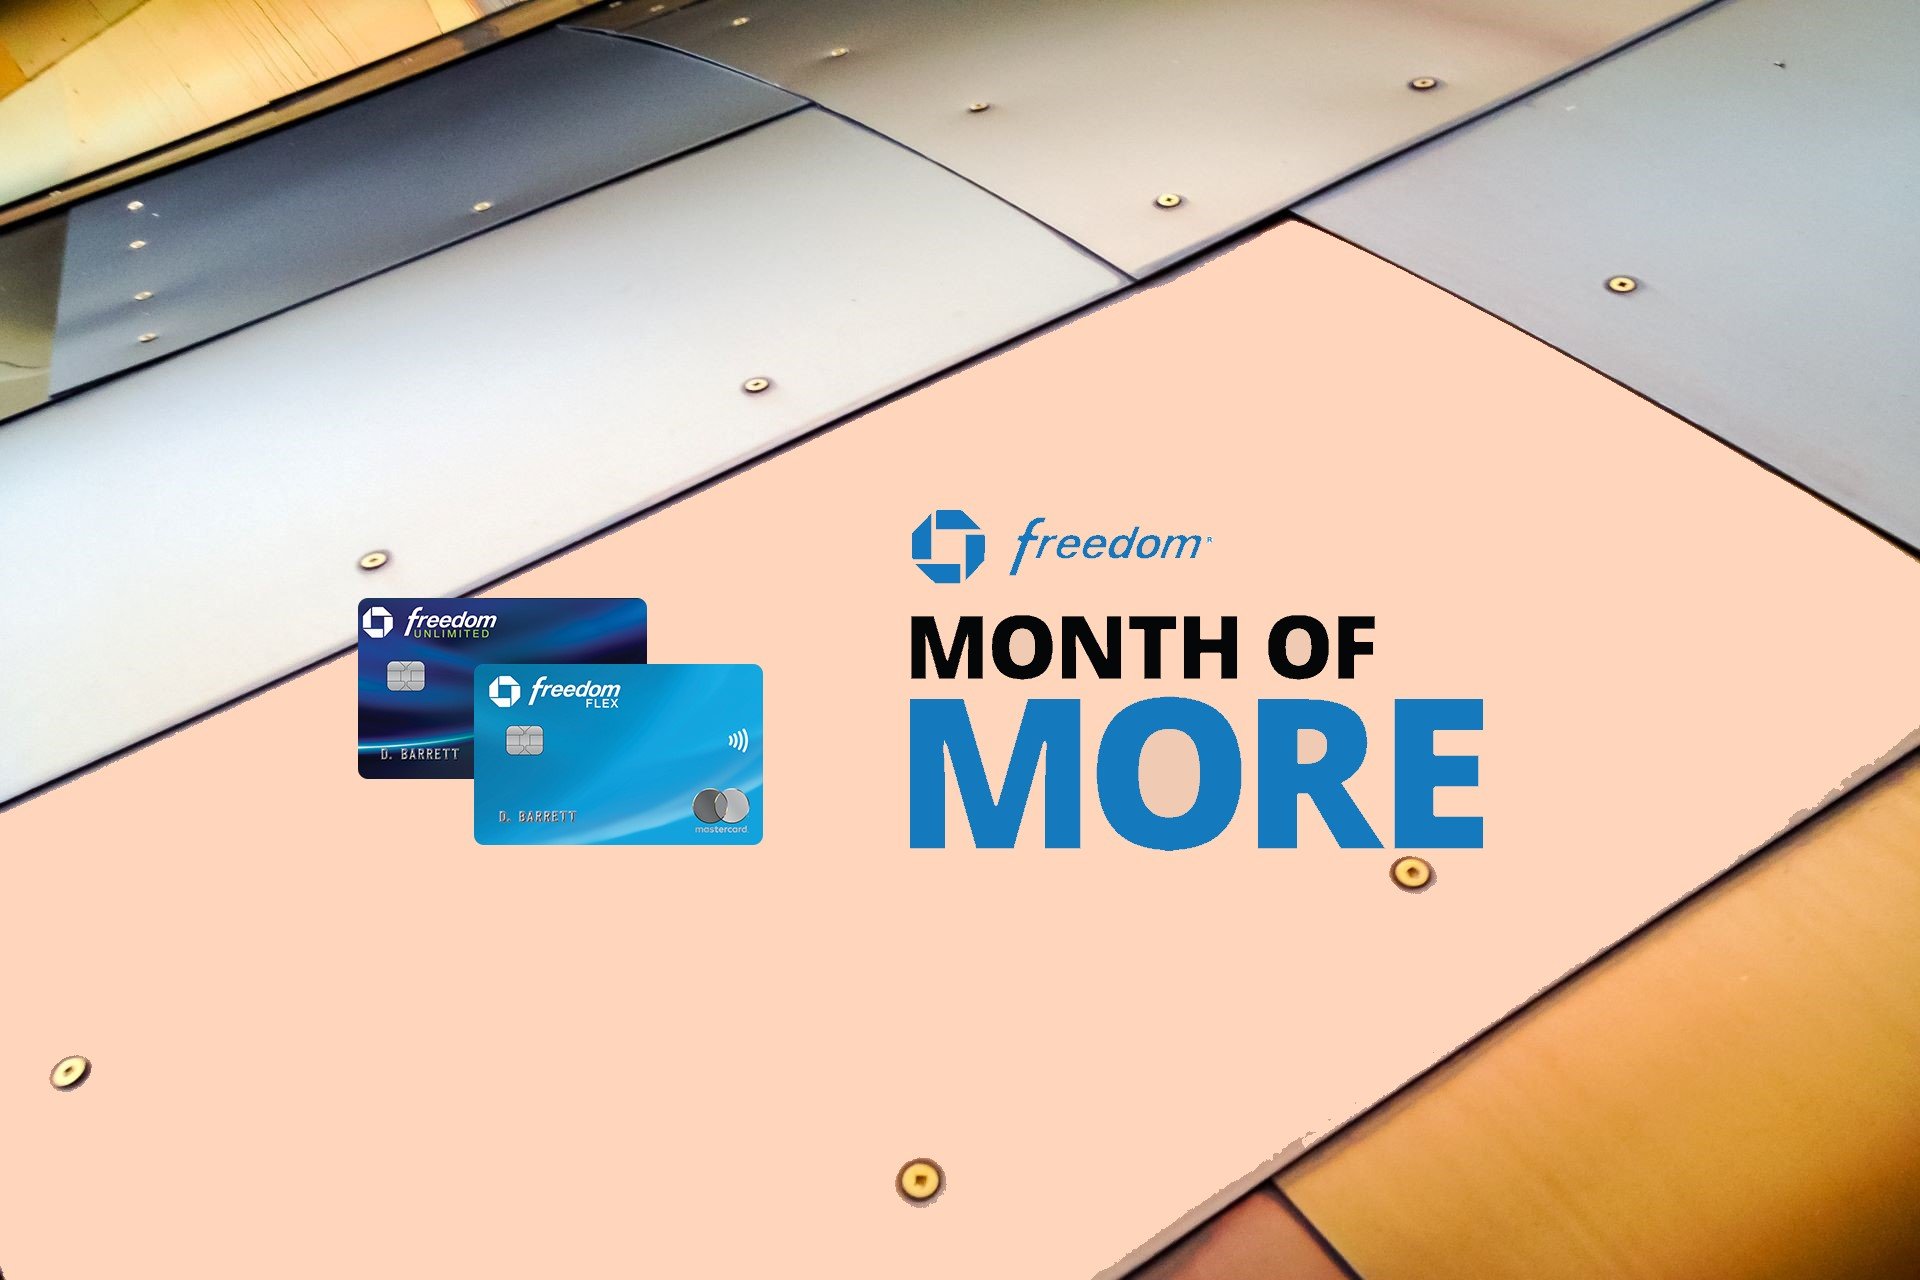 Chase Unveils Month of More Promotion